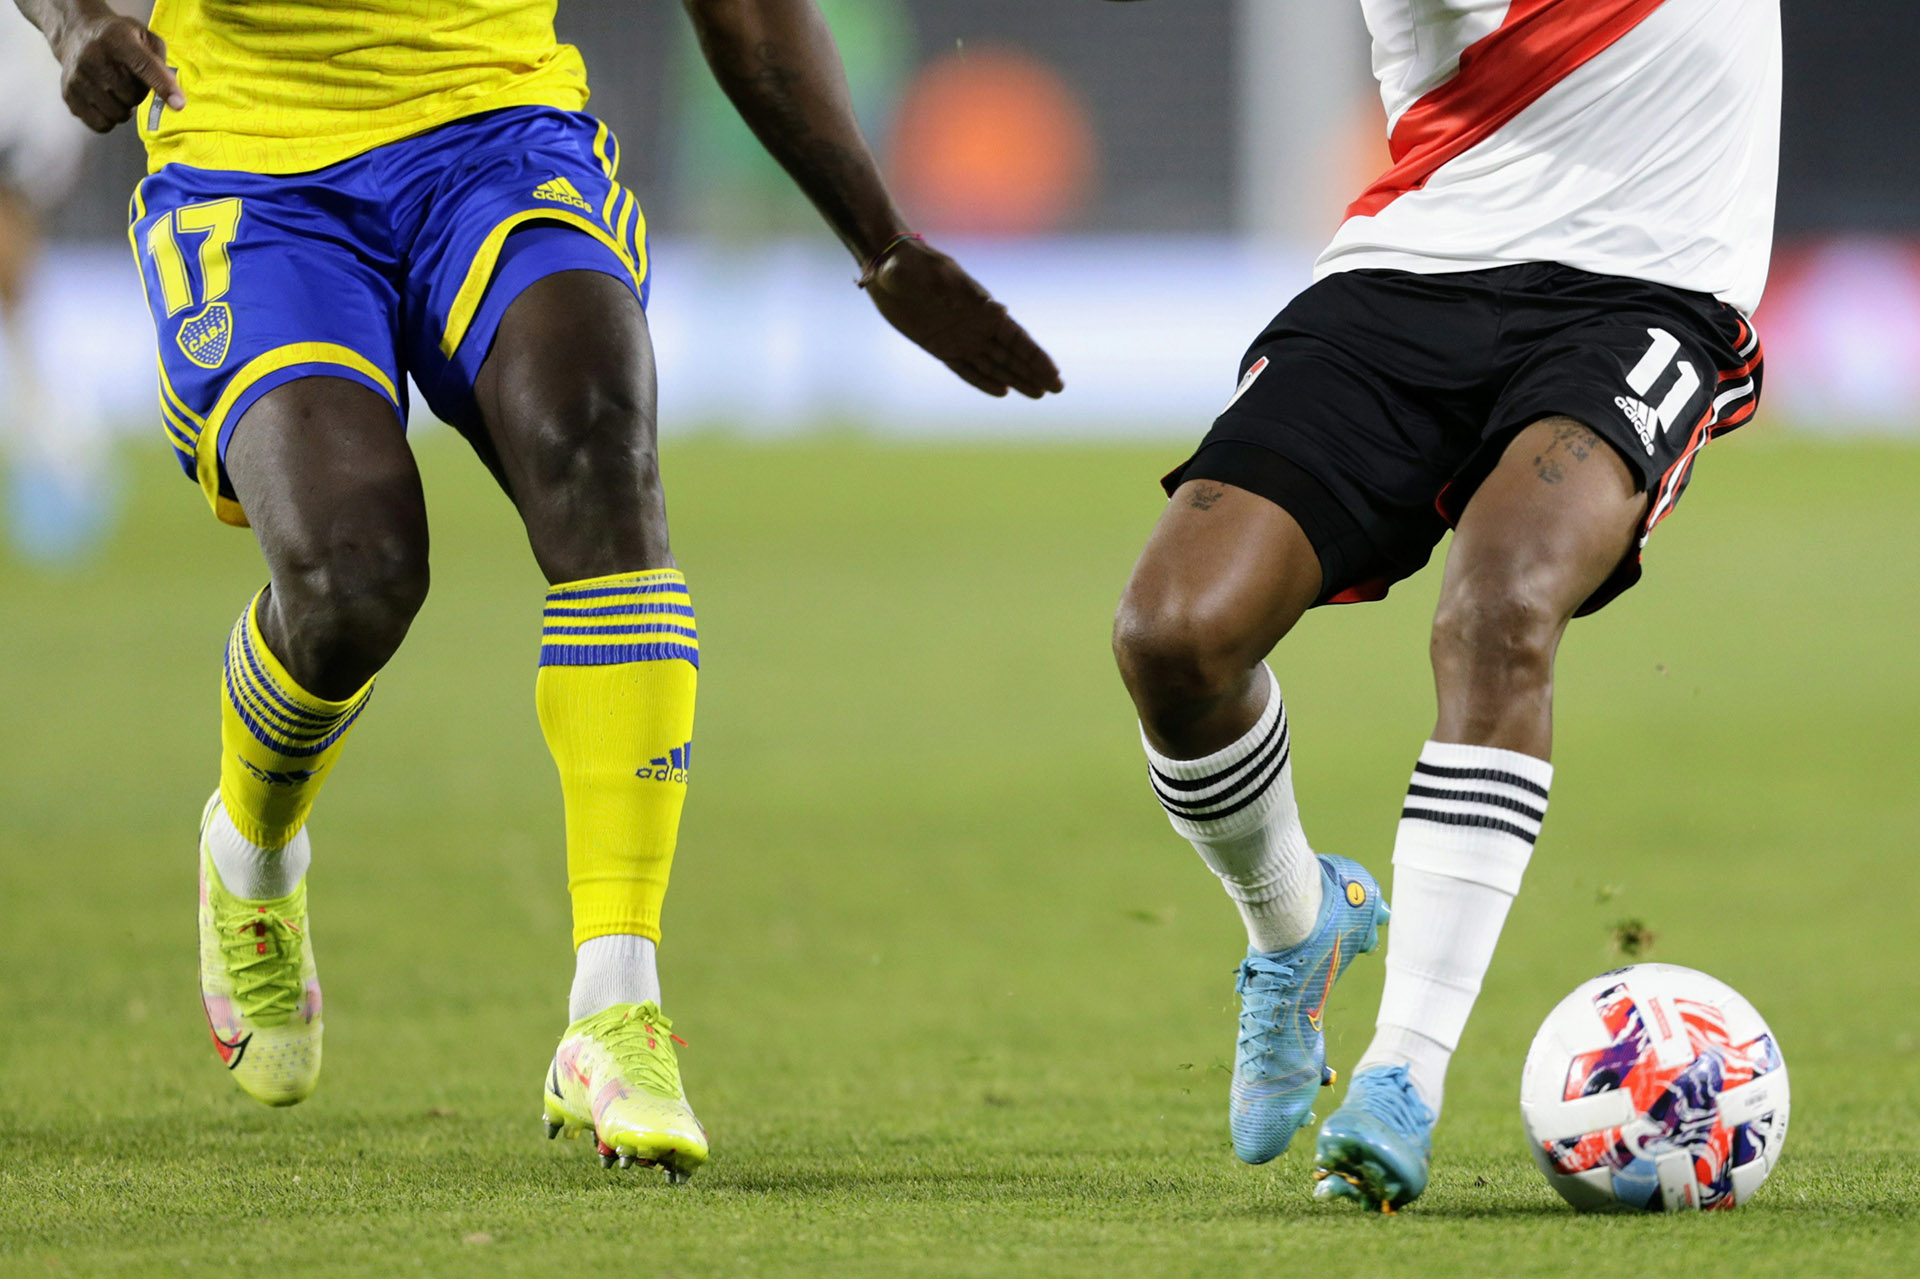 Boca and River could meet in the semi-finals of the Argentina Cup (@fotobairesarg)